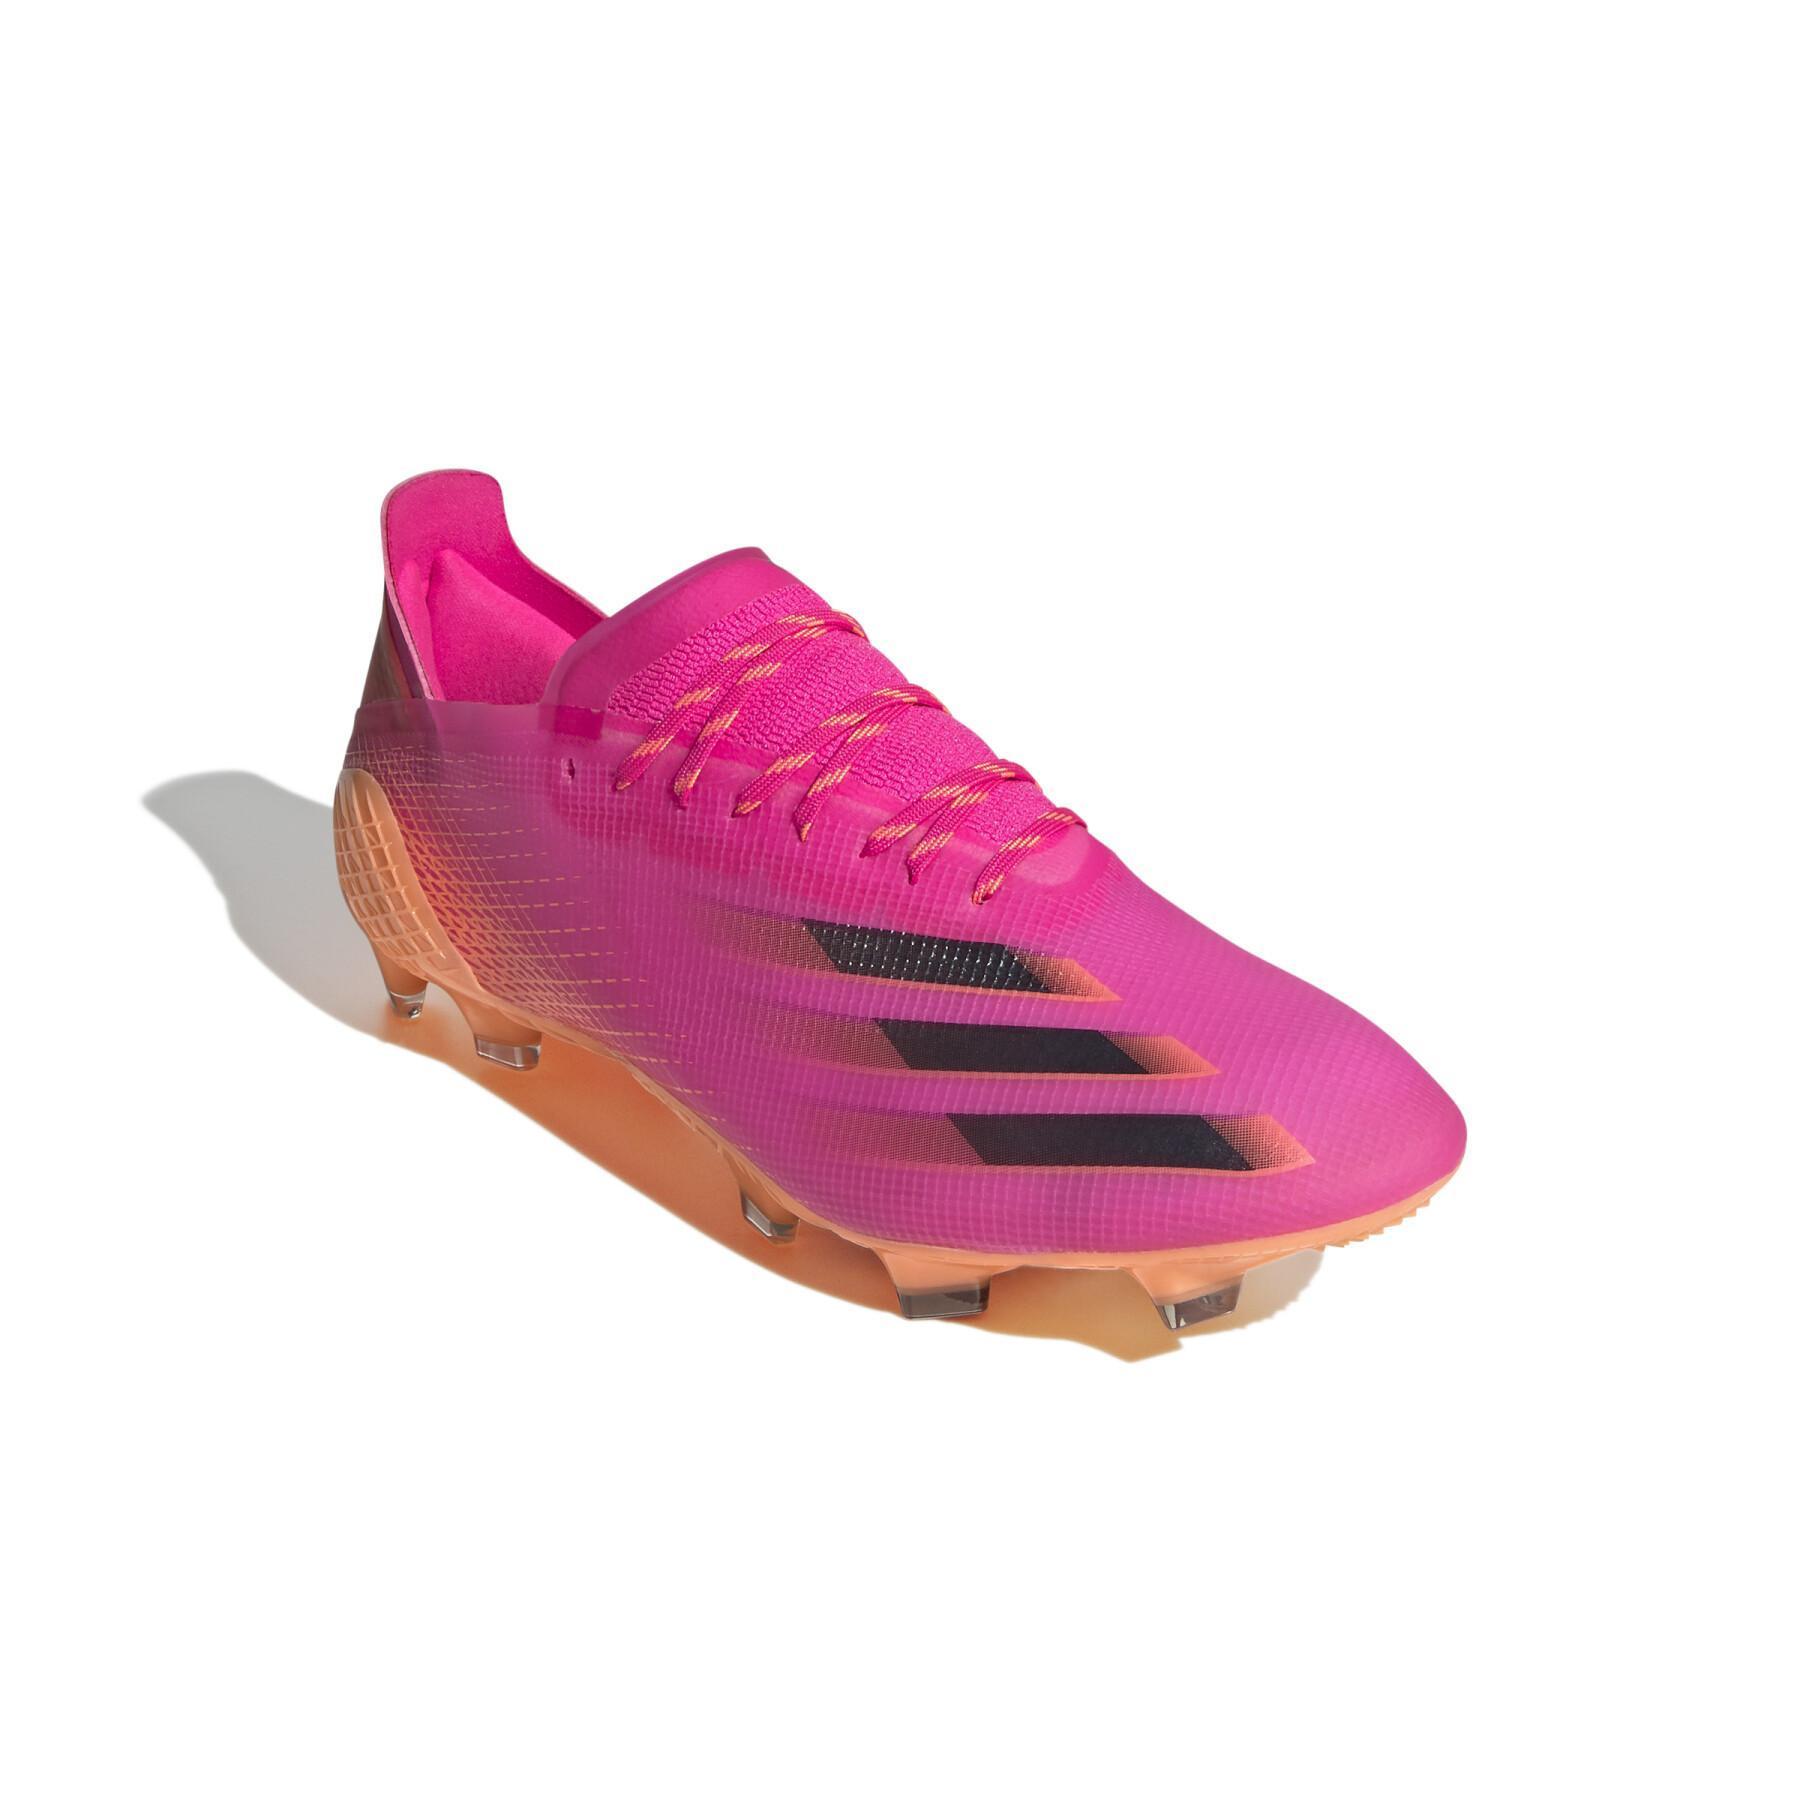 Chaussures de football adidas X Ghosted.1 FG